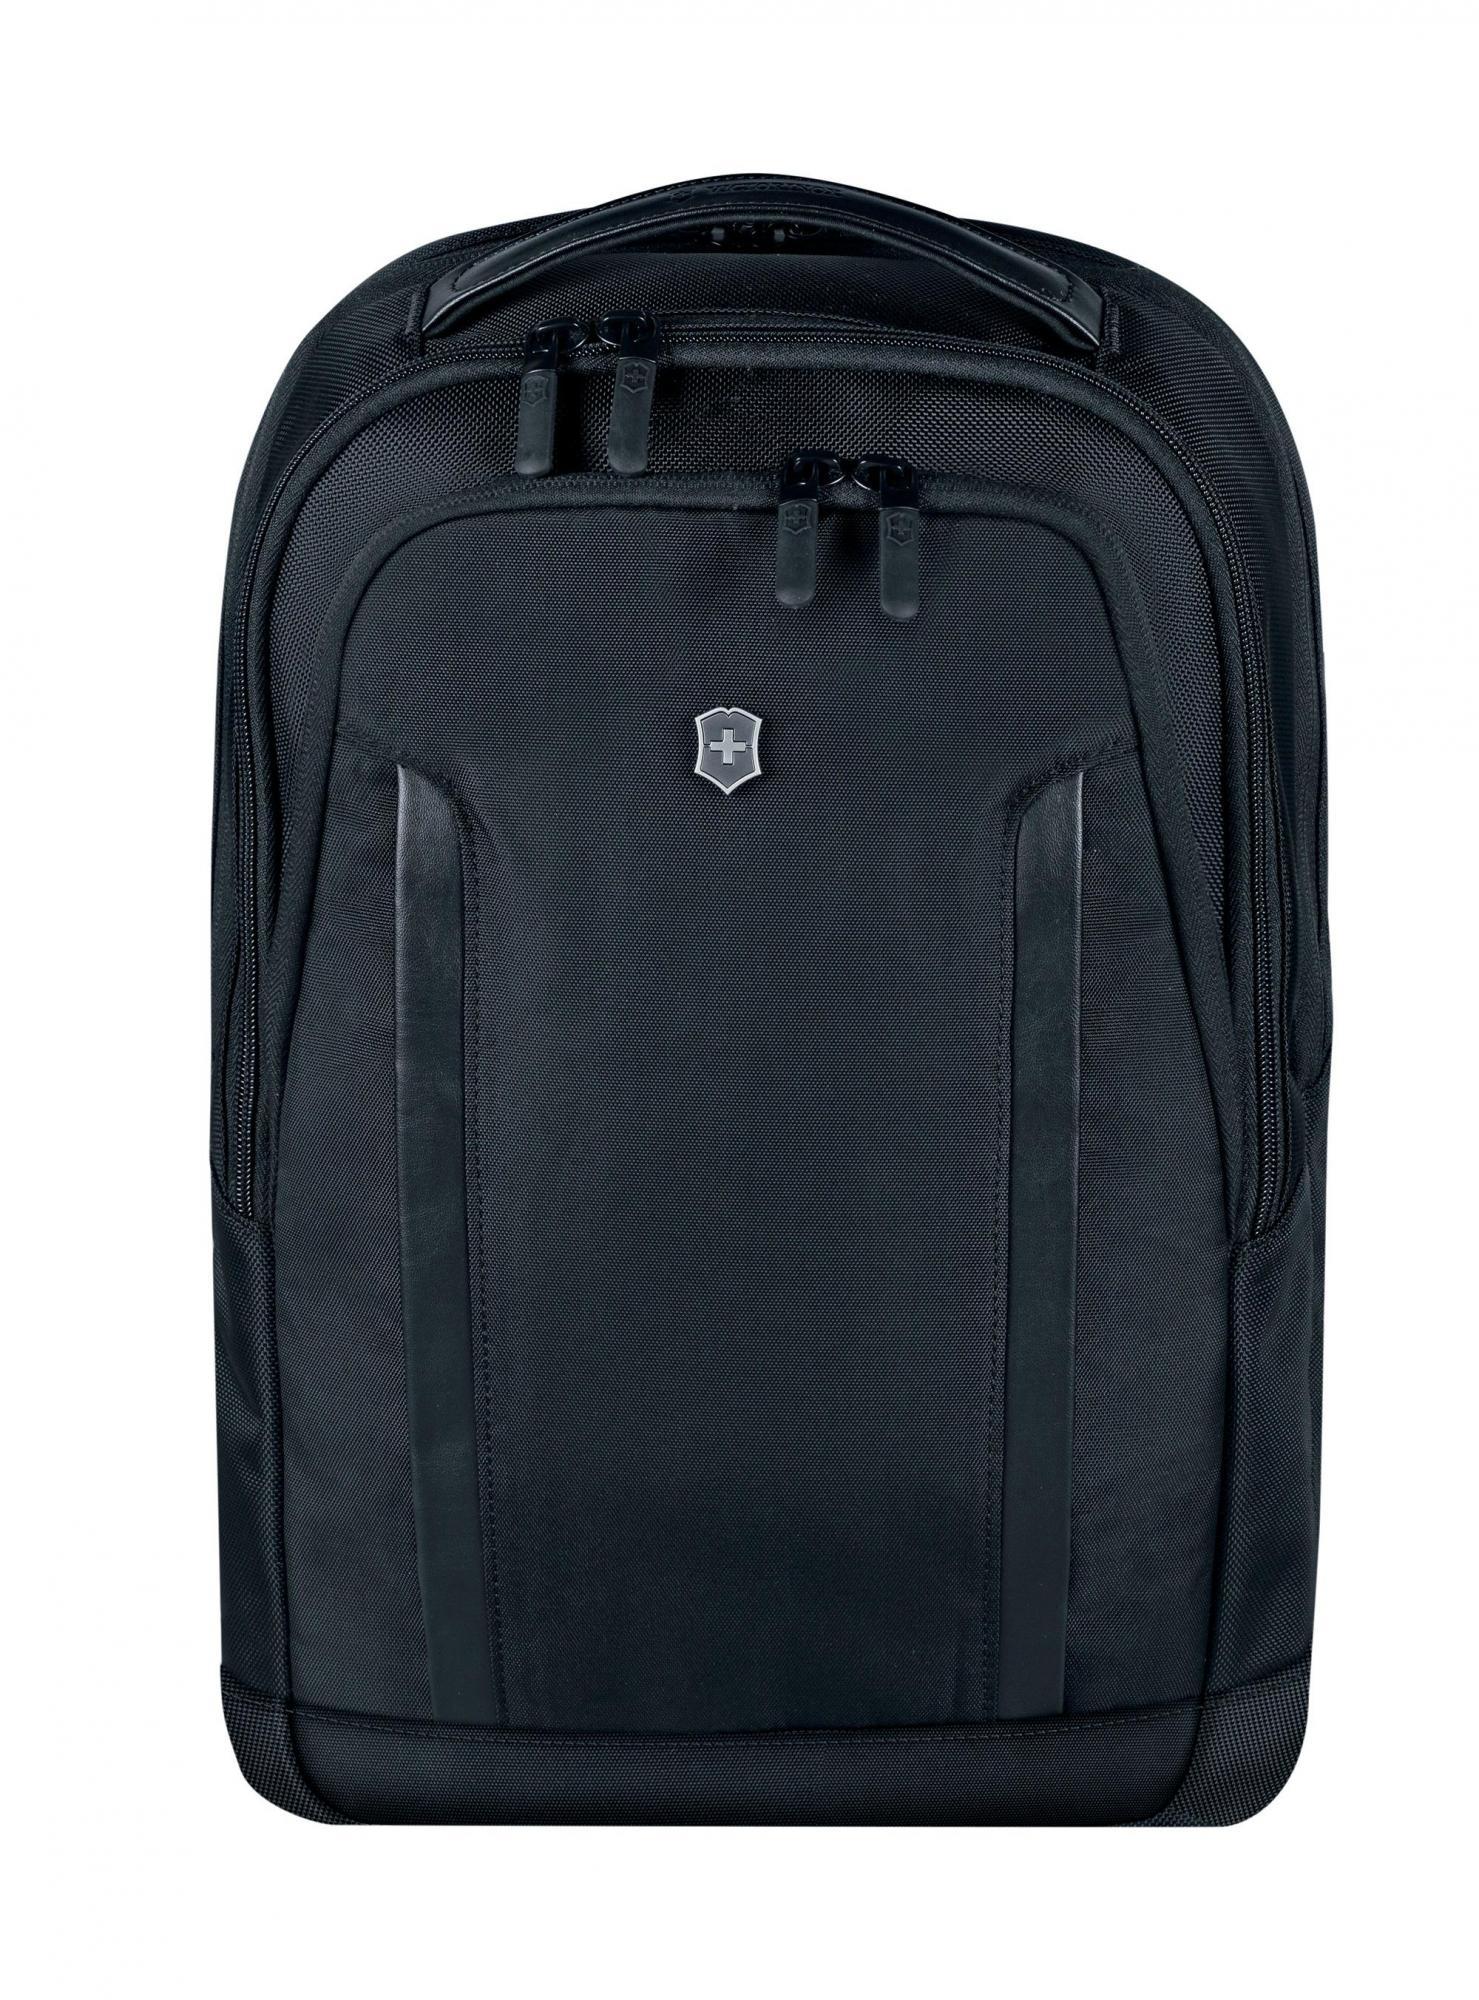 Victorinox Altmont Professional Compact Laptop Backpack – Luggage Pros